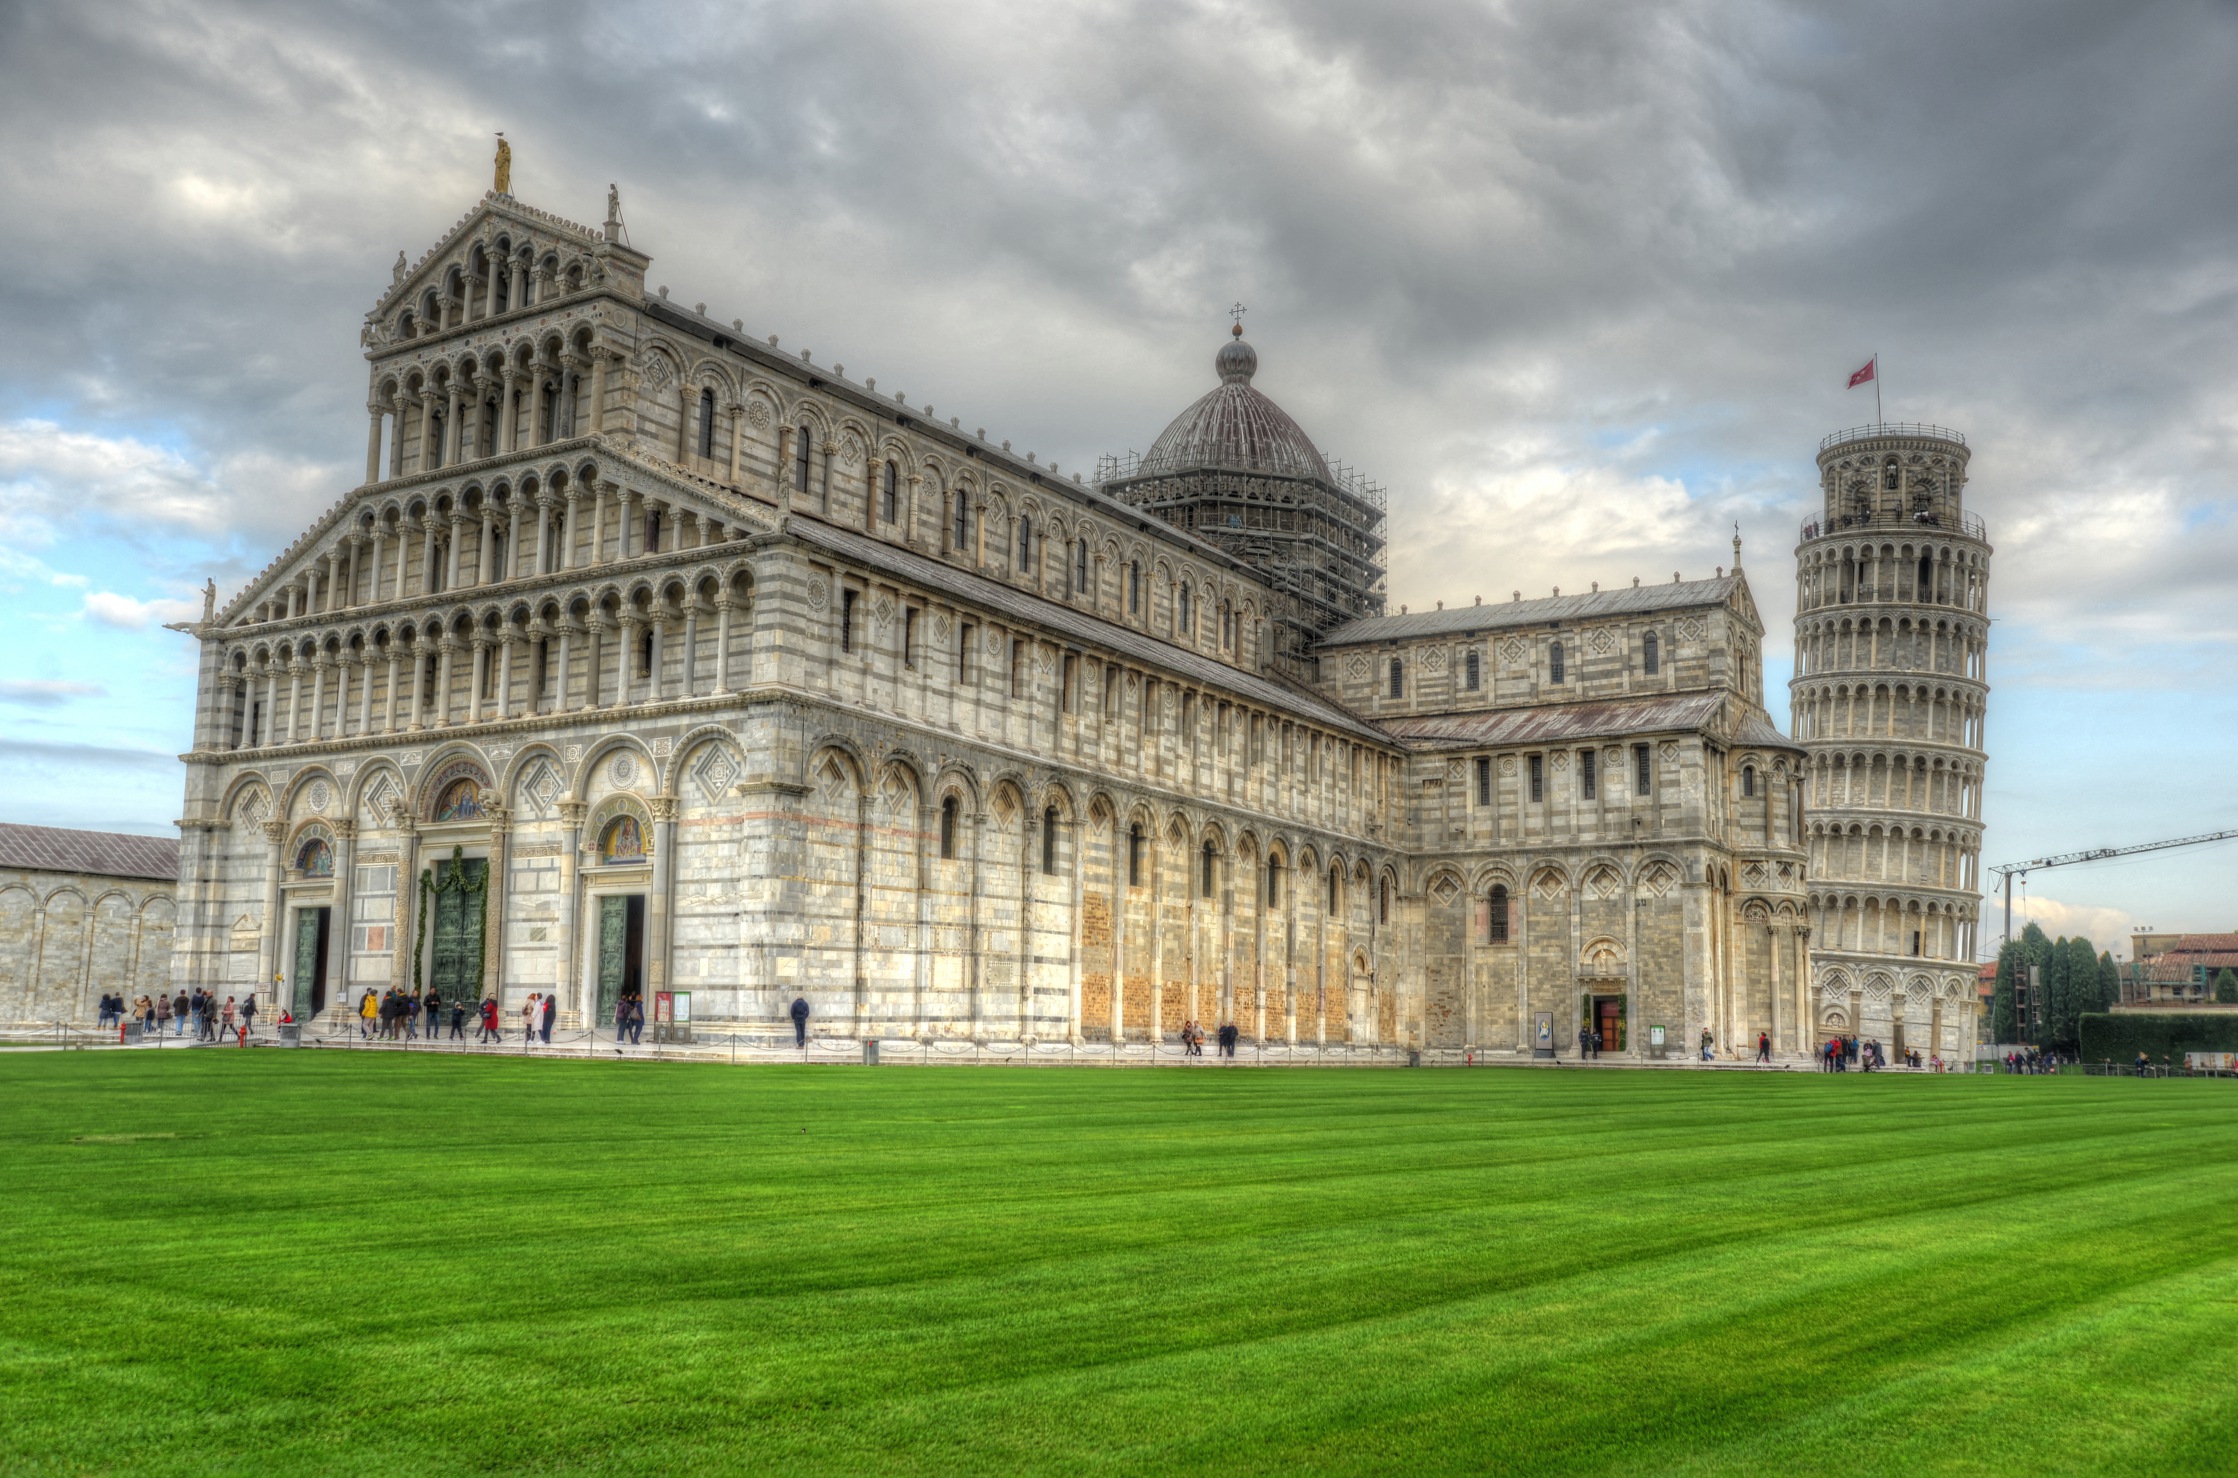 Leaning Tower of Pisa with the Cathedral